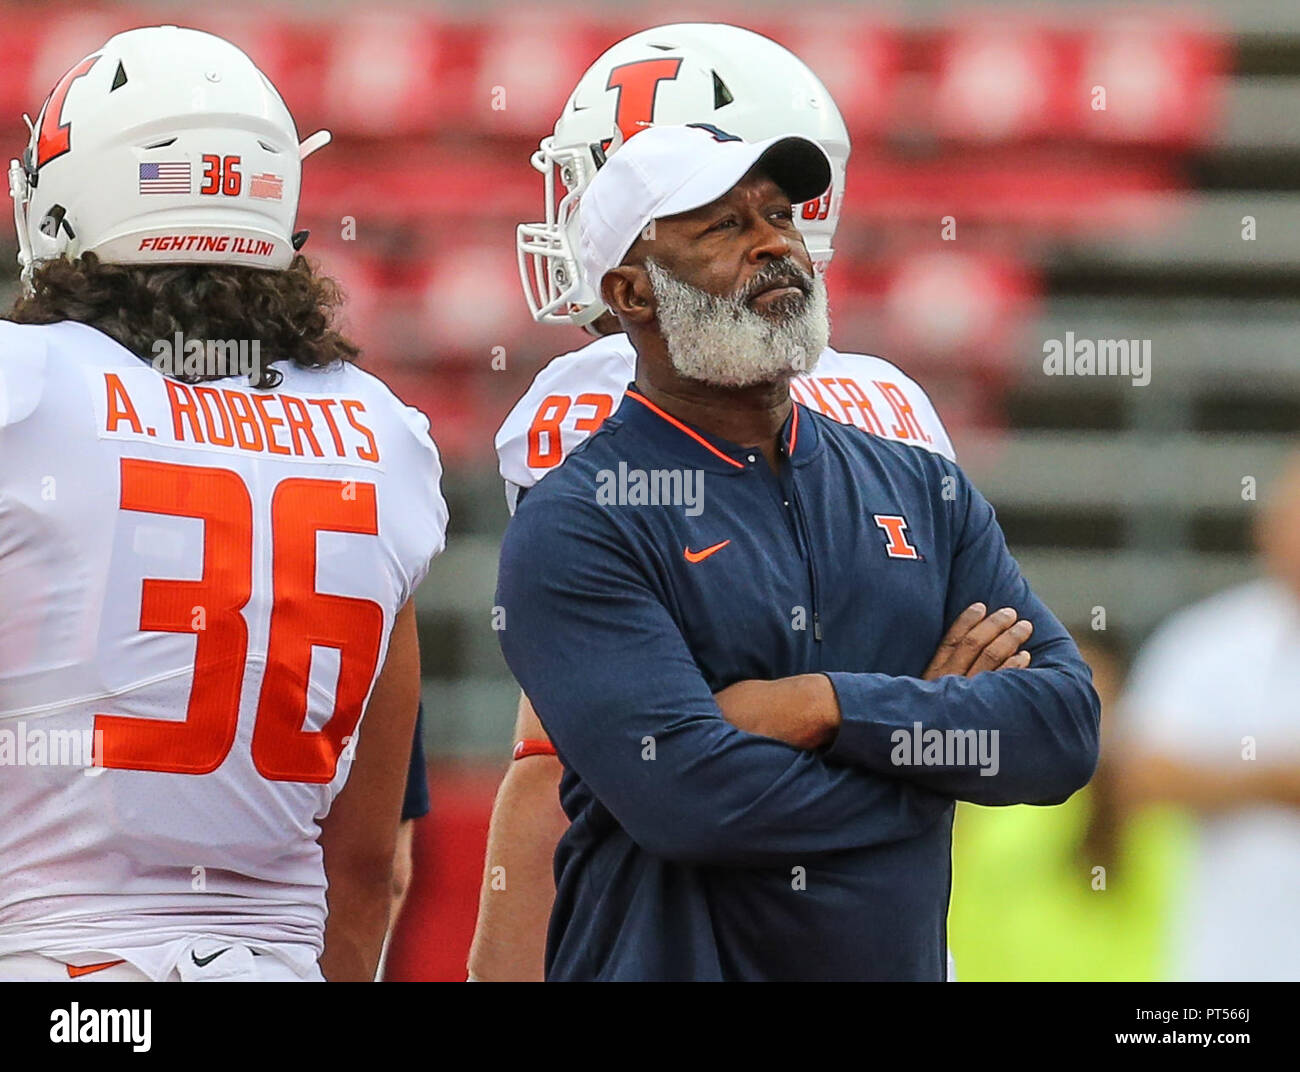 Piscataway, NJ, USA. 6th Oct, 2018. Illinois head coach Love Smith before an NCAA football game between the Illinois Fighting Illini and the Rutgers Scarlet Knights at HighPoint Solutions Stadium in Piscataway, NJ. Mike Langish/Cal Sport Media. Credit: csm/Alamy Live News Stock Photo